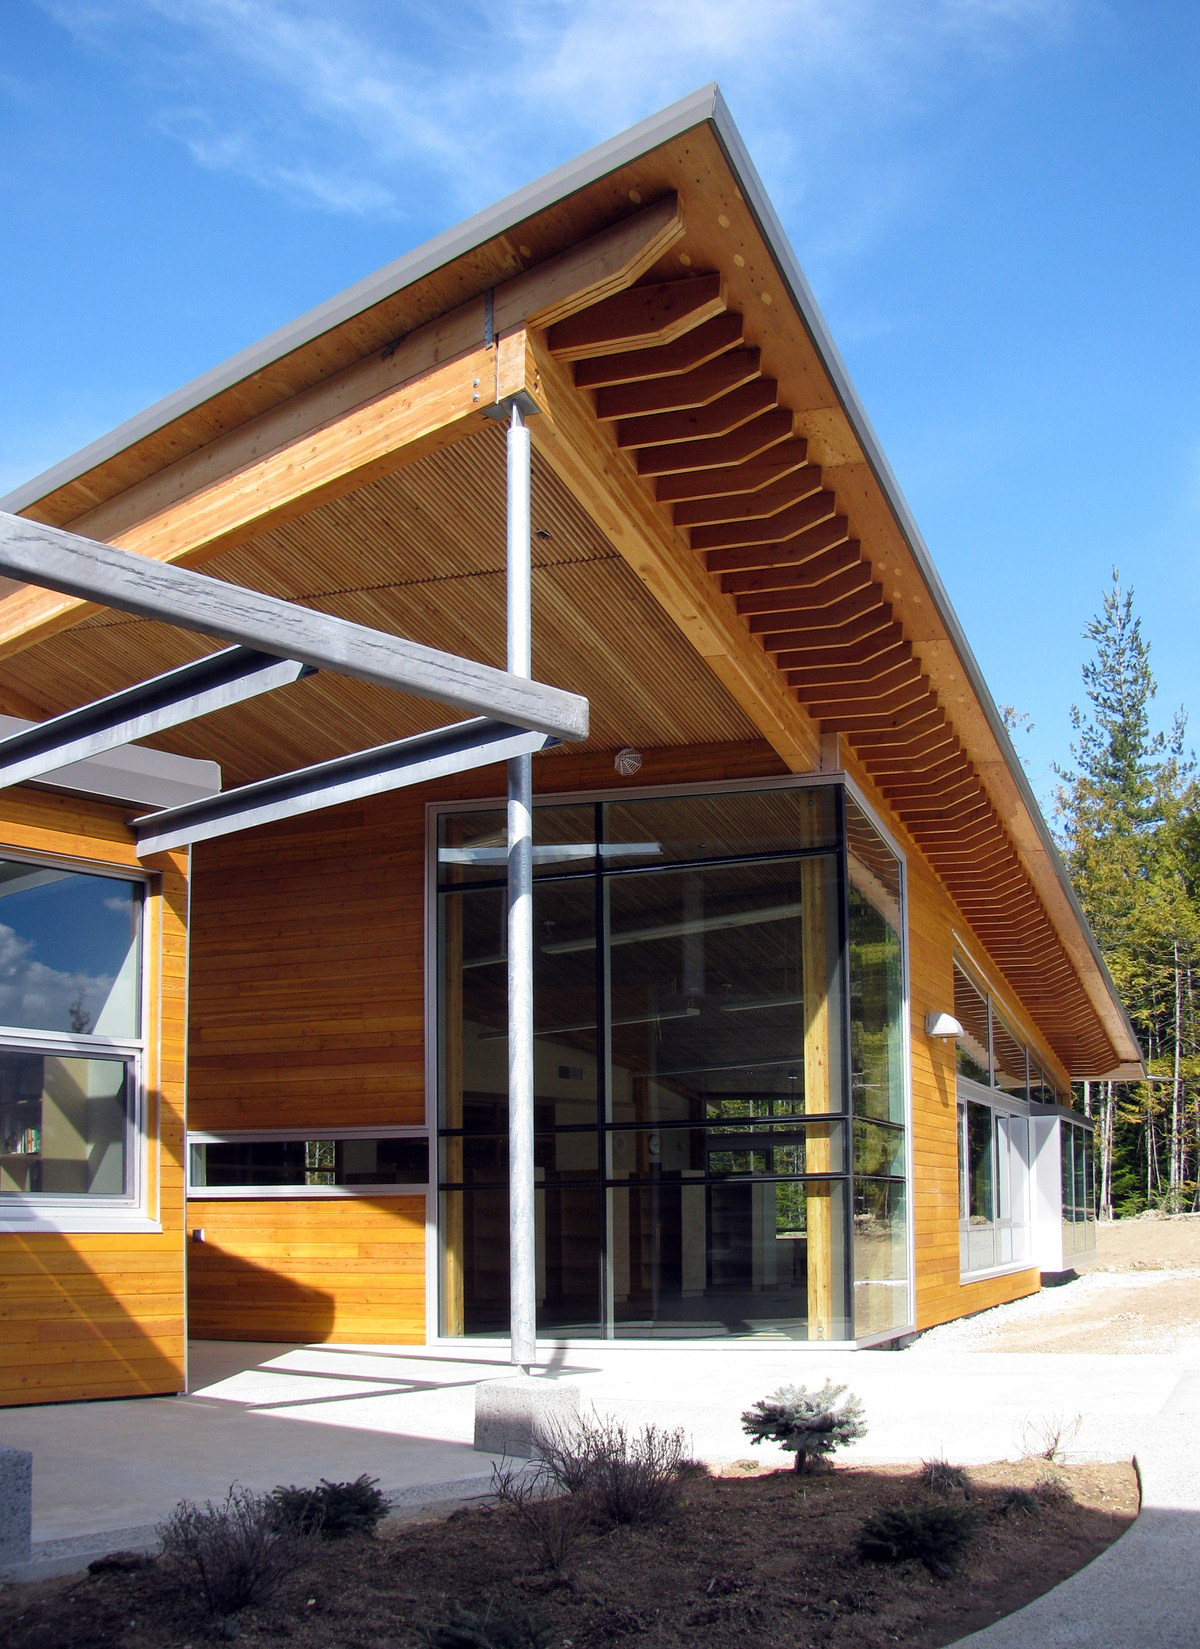 Exterior view of low rise Crawford Bay Elementary-Secondary School showing hybrid construction with significant wood use, including paneling, post + beam, and a roof overhang prefabricated on site from stacked wood planks and glulam beams